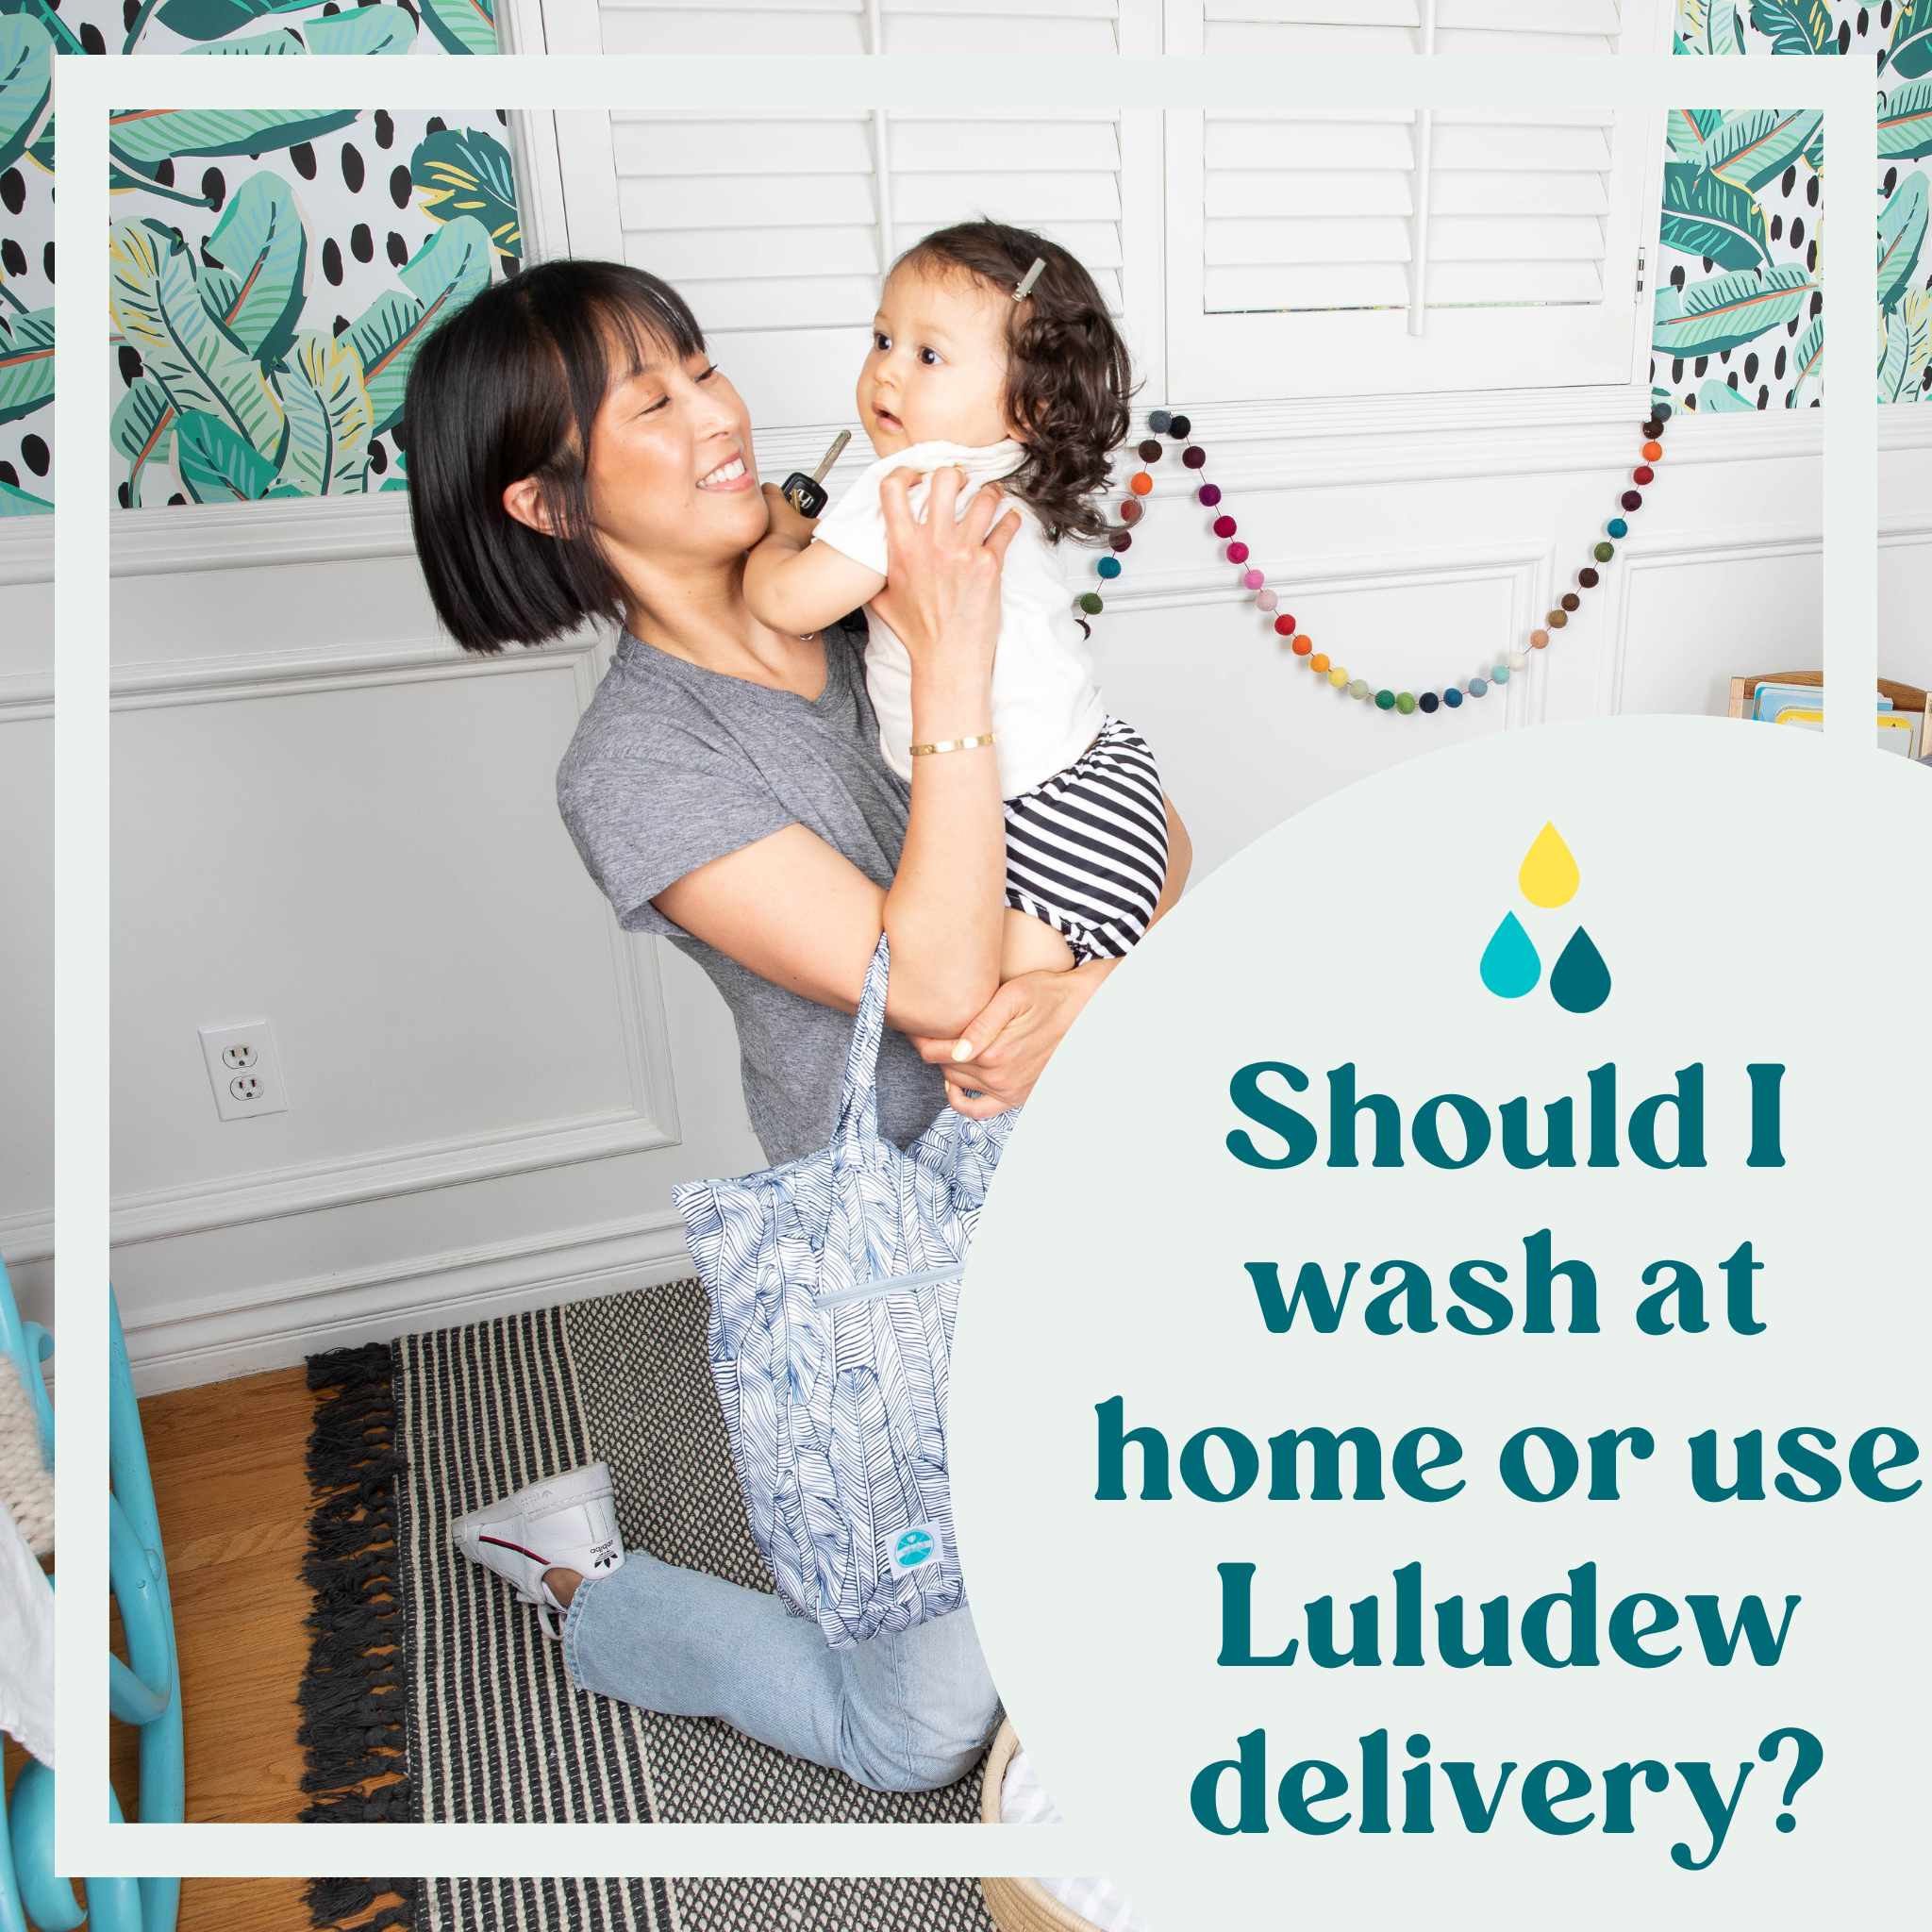 Should I wash my diapers at home or use Luludew to wash them for me?